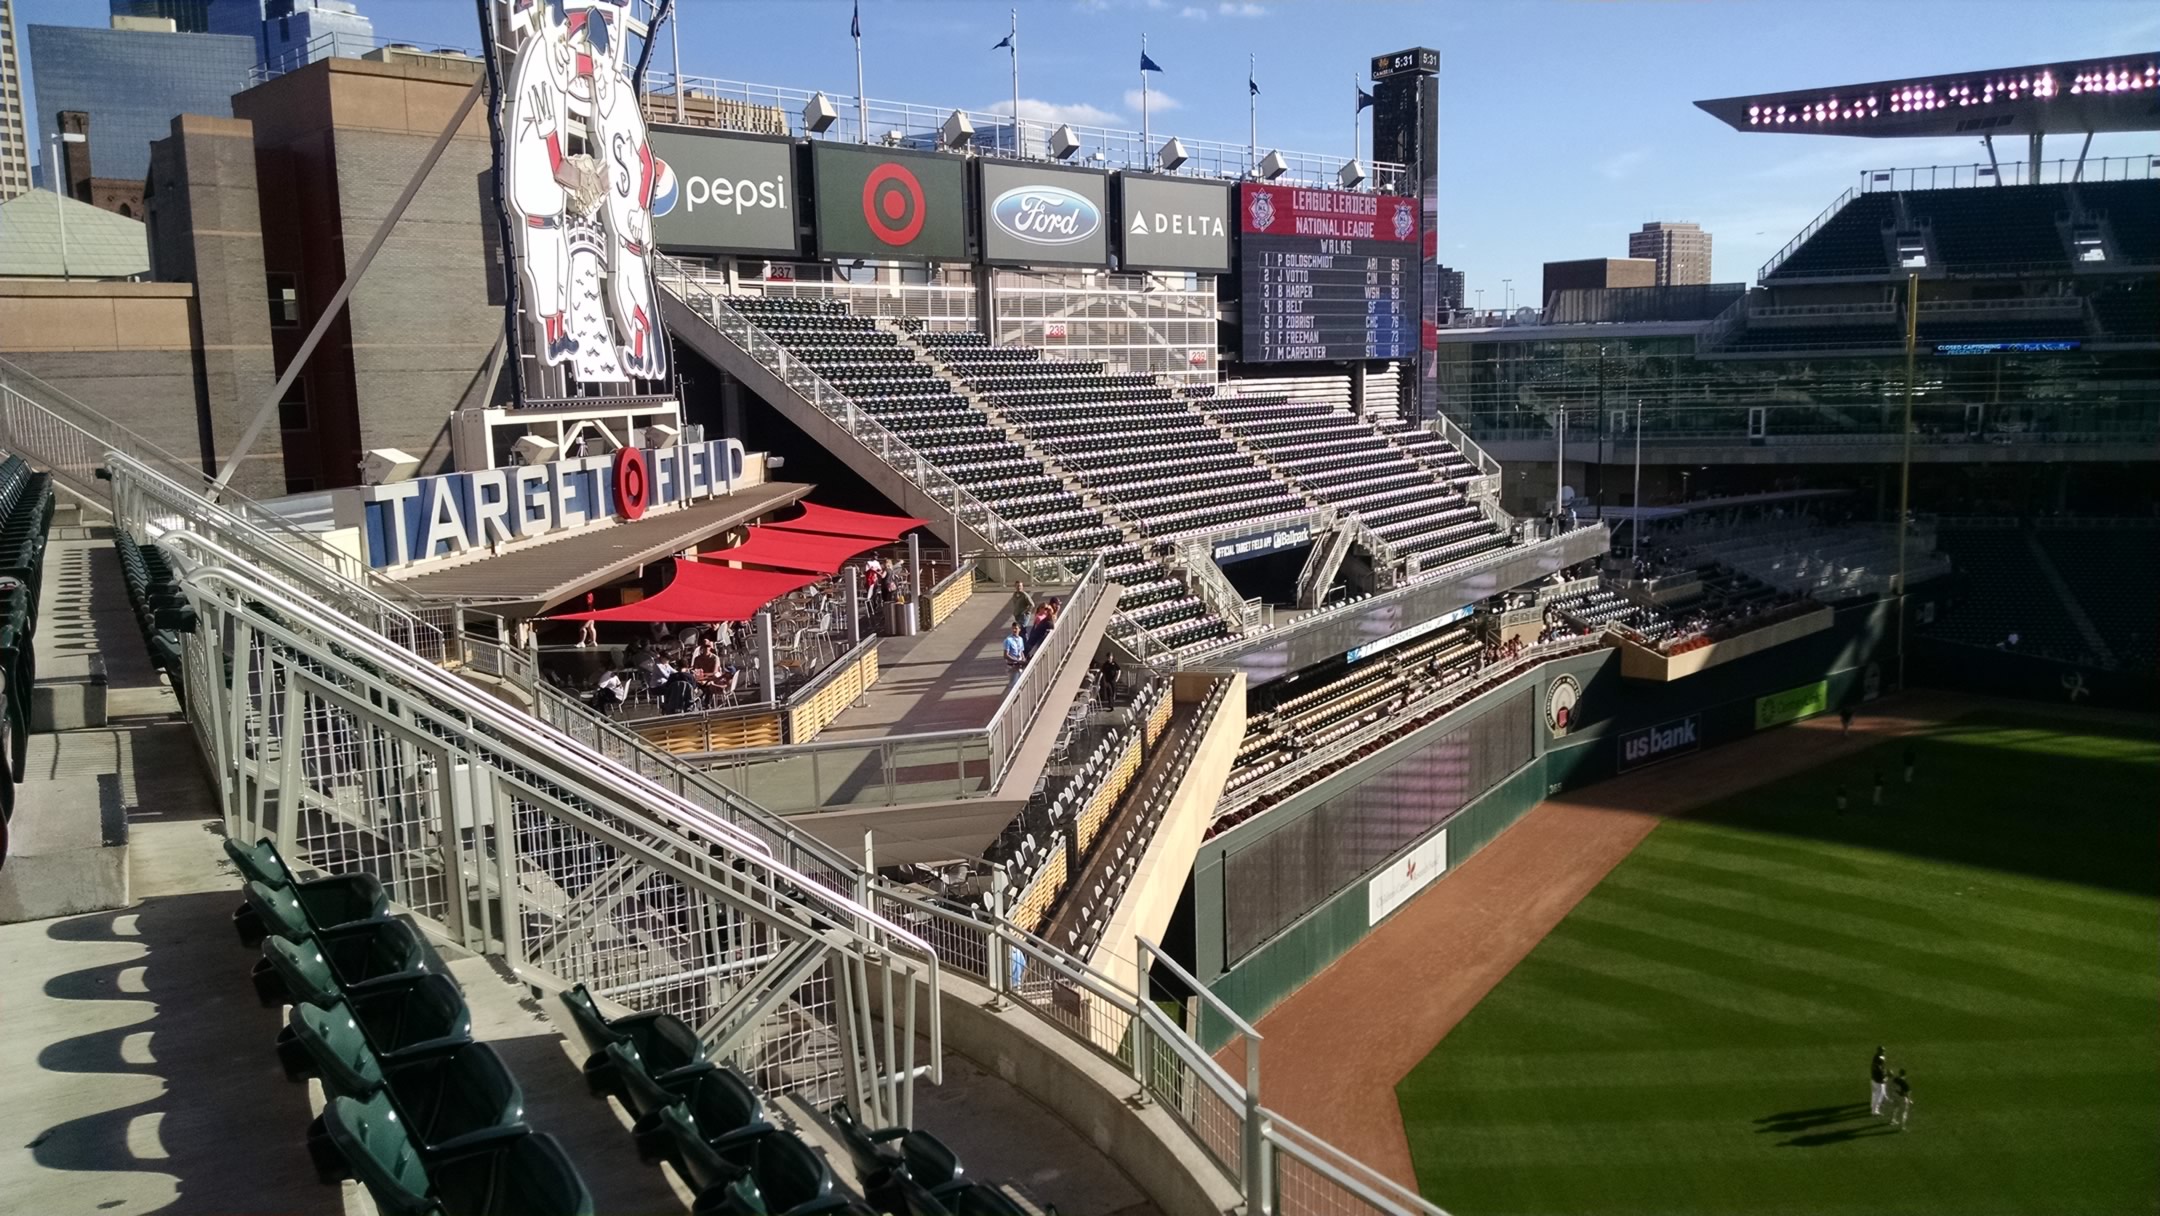 Must see stops at Target Field